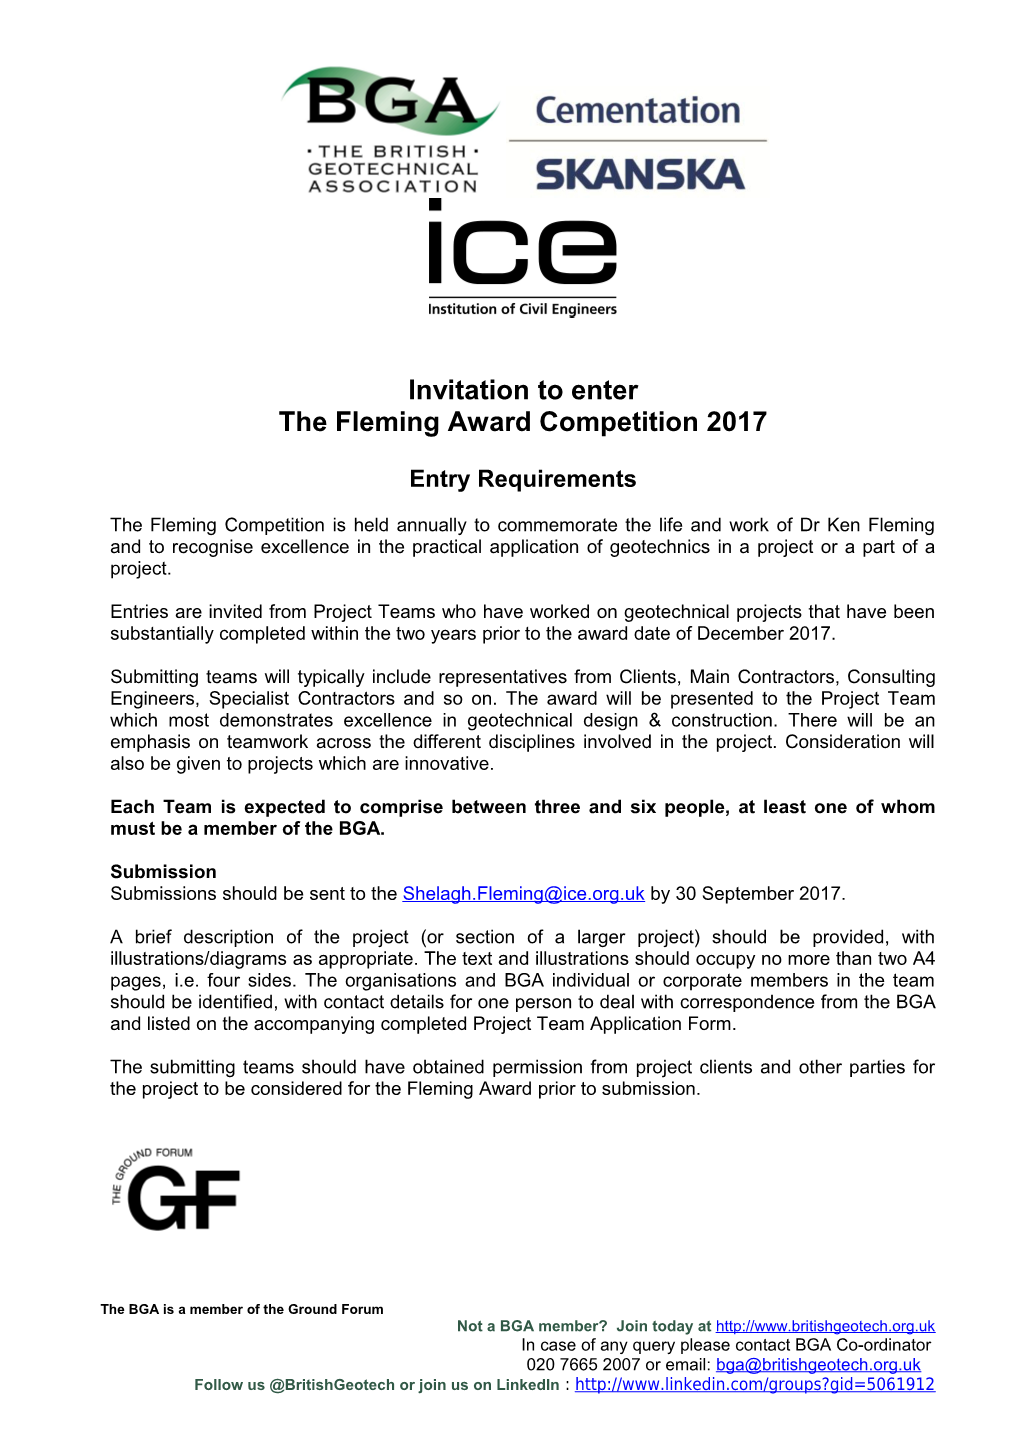 The Fleming Award Competition 2017